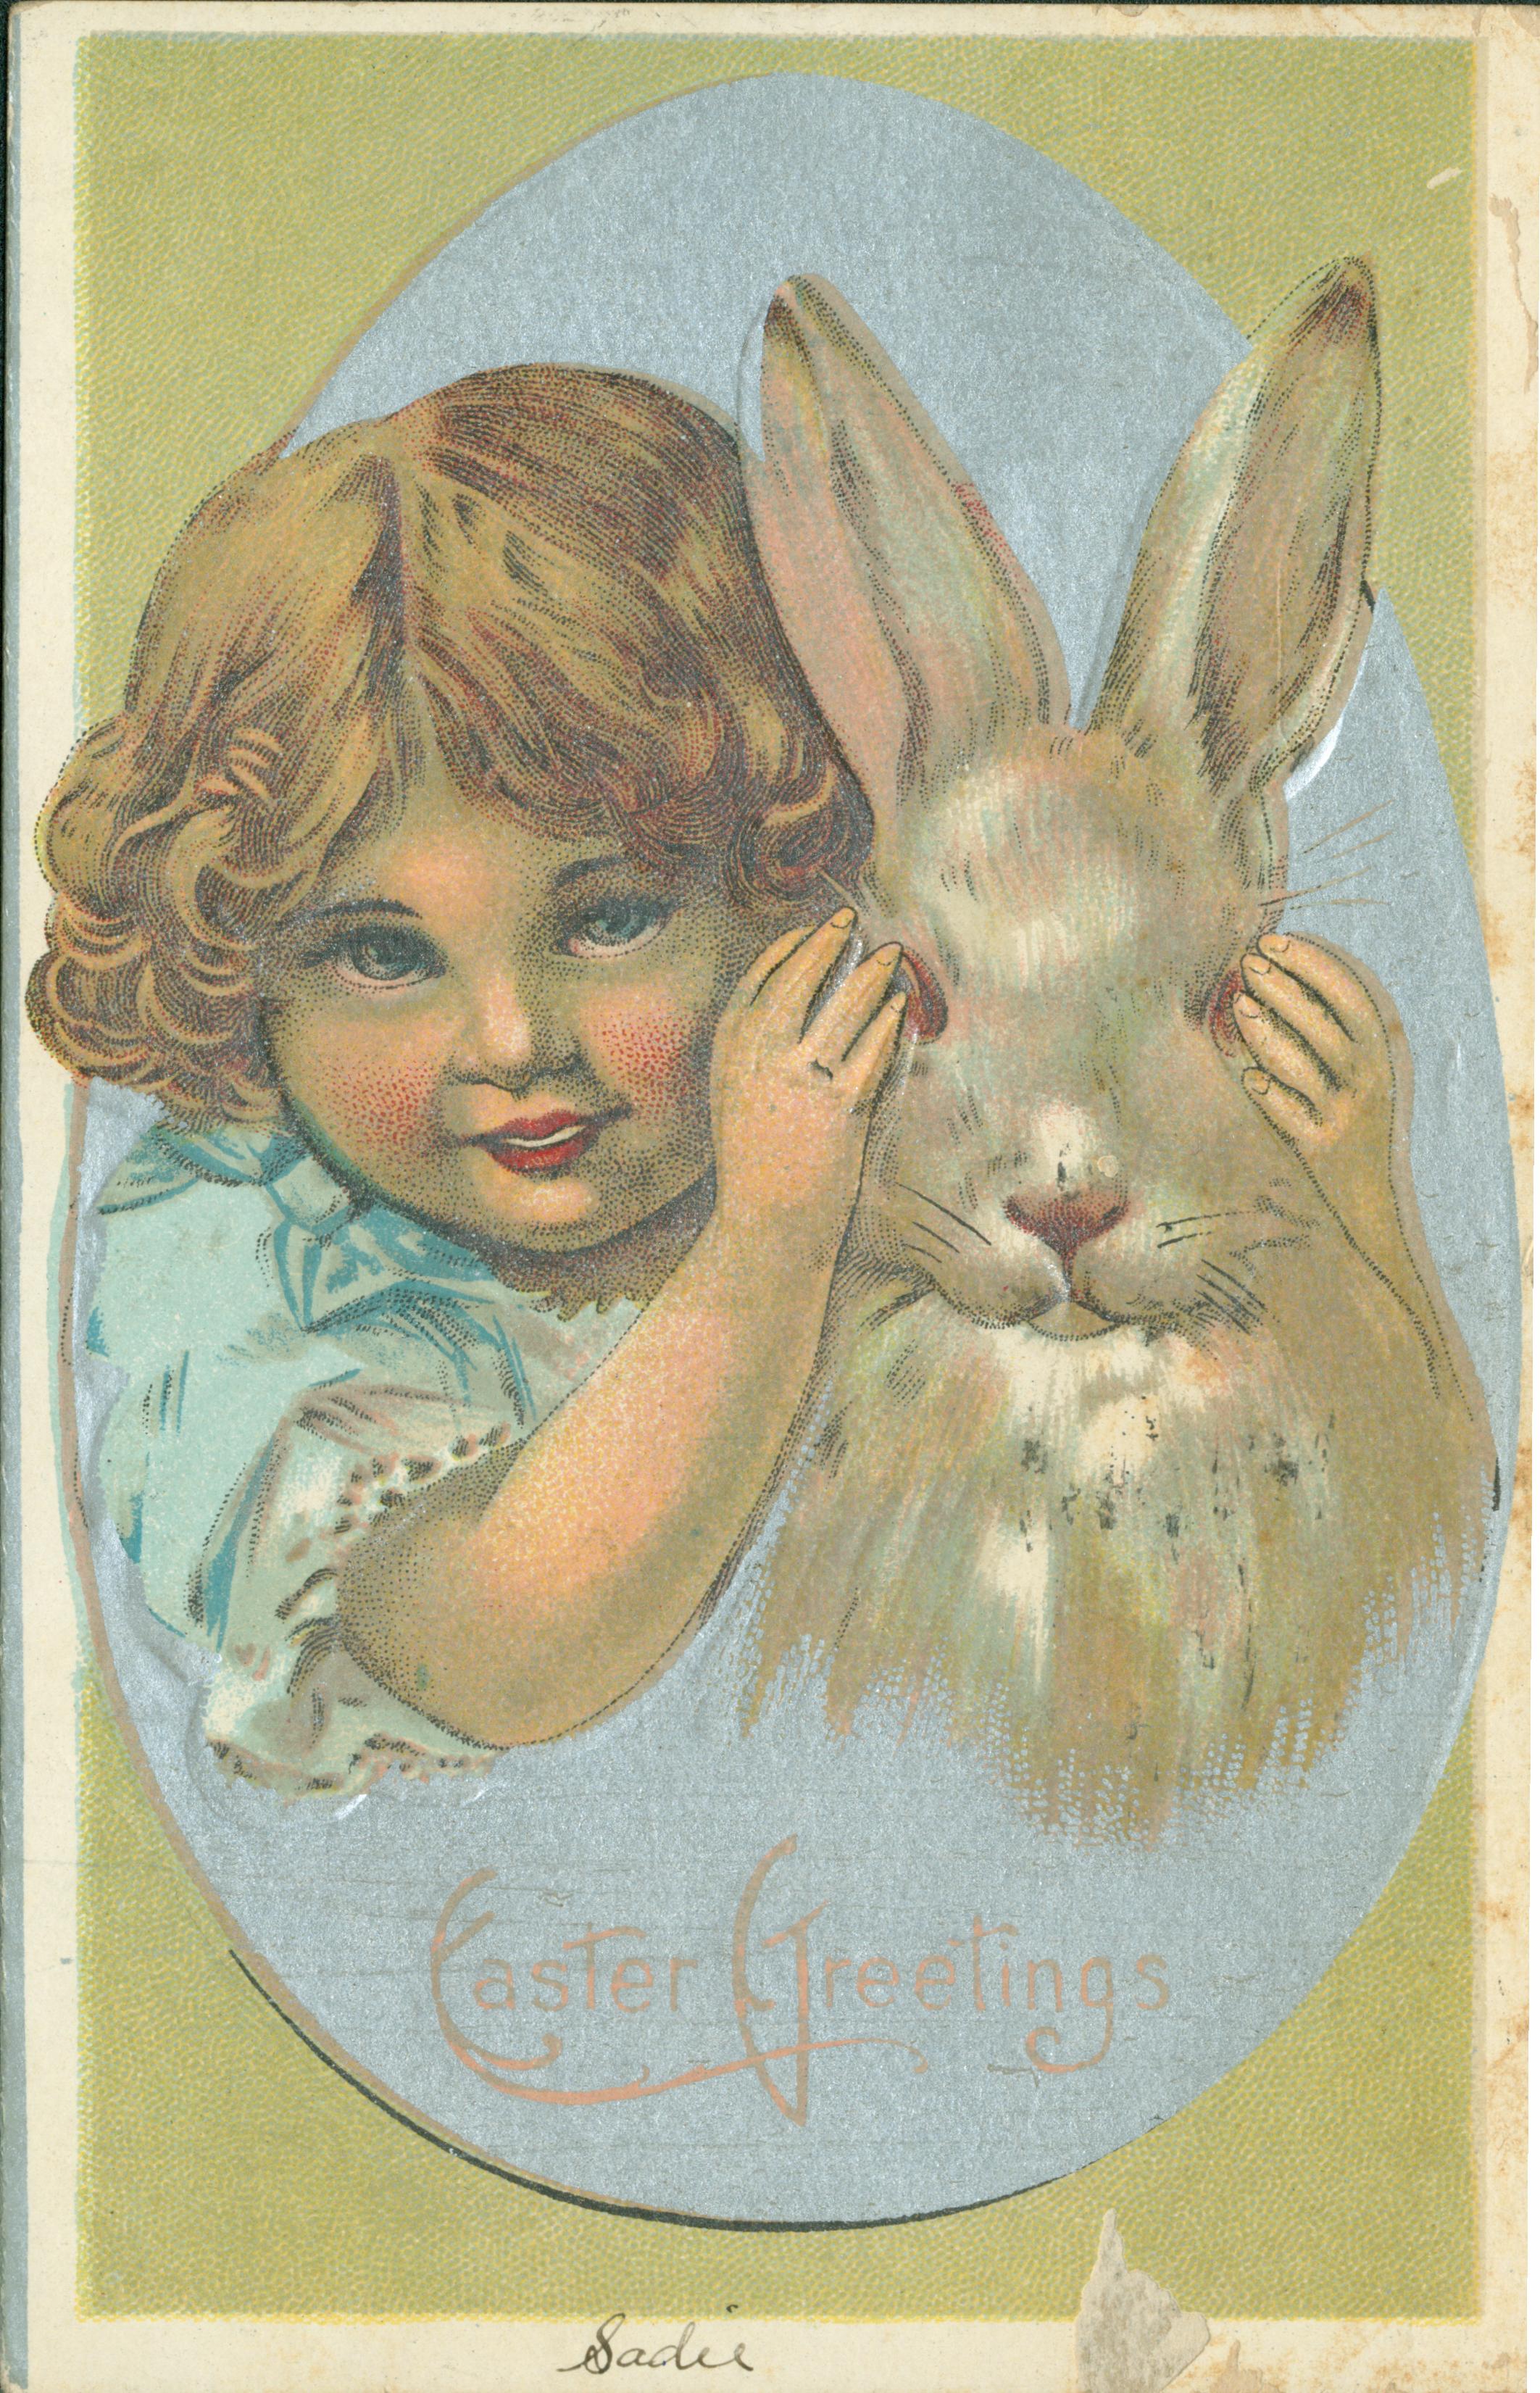 A young girl covering the eyes of a rabbit.